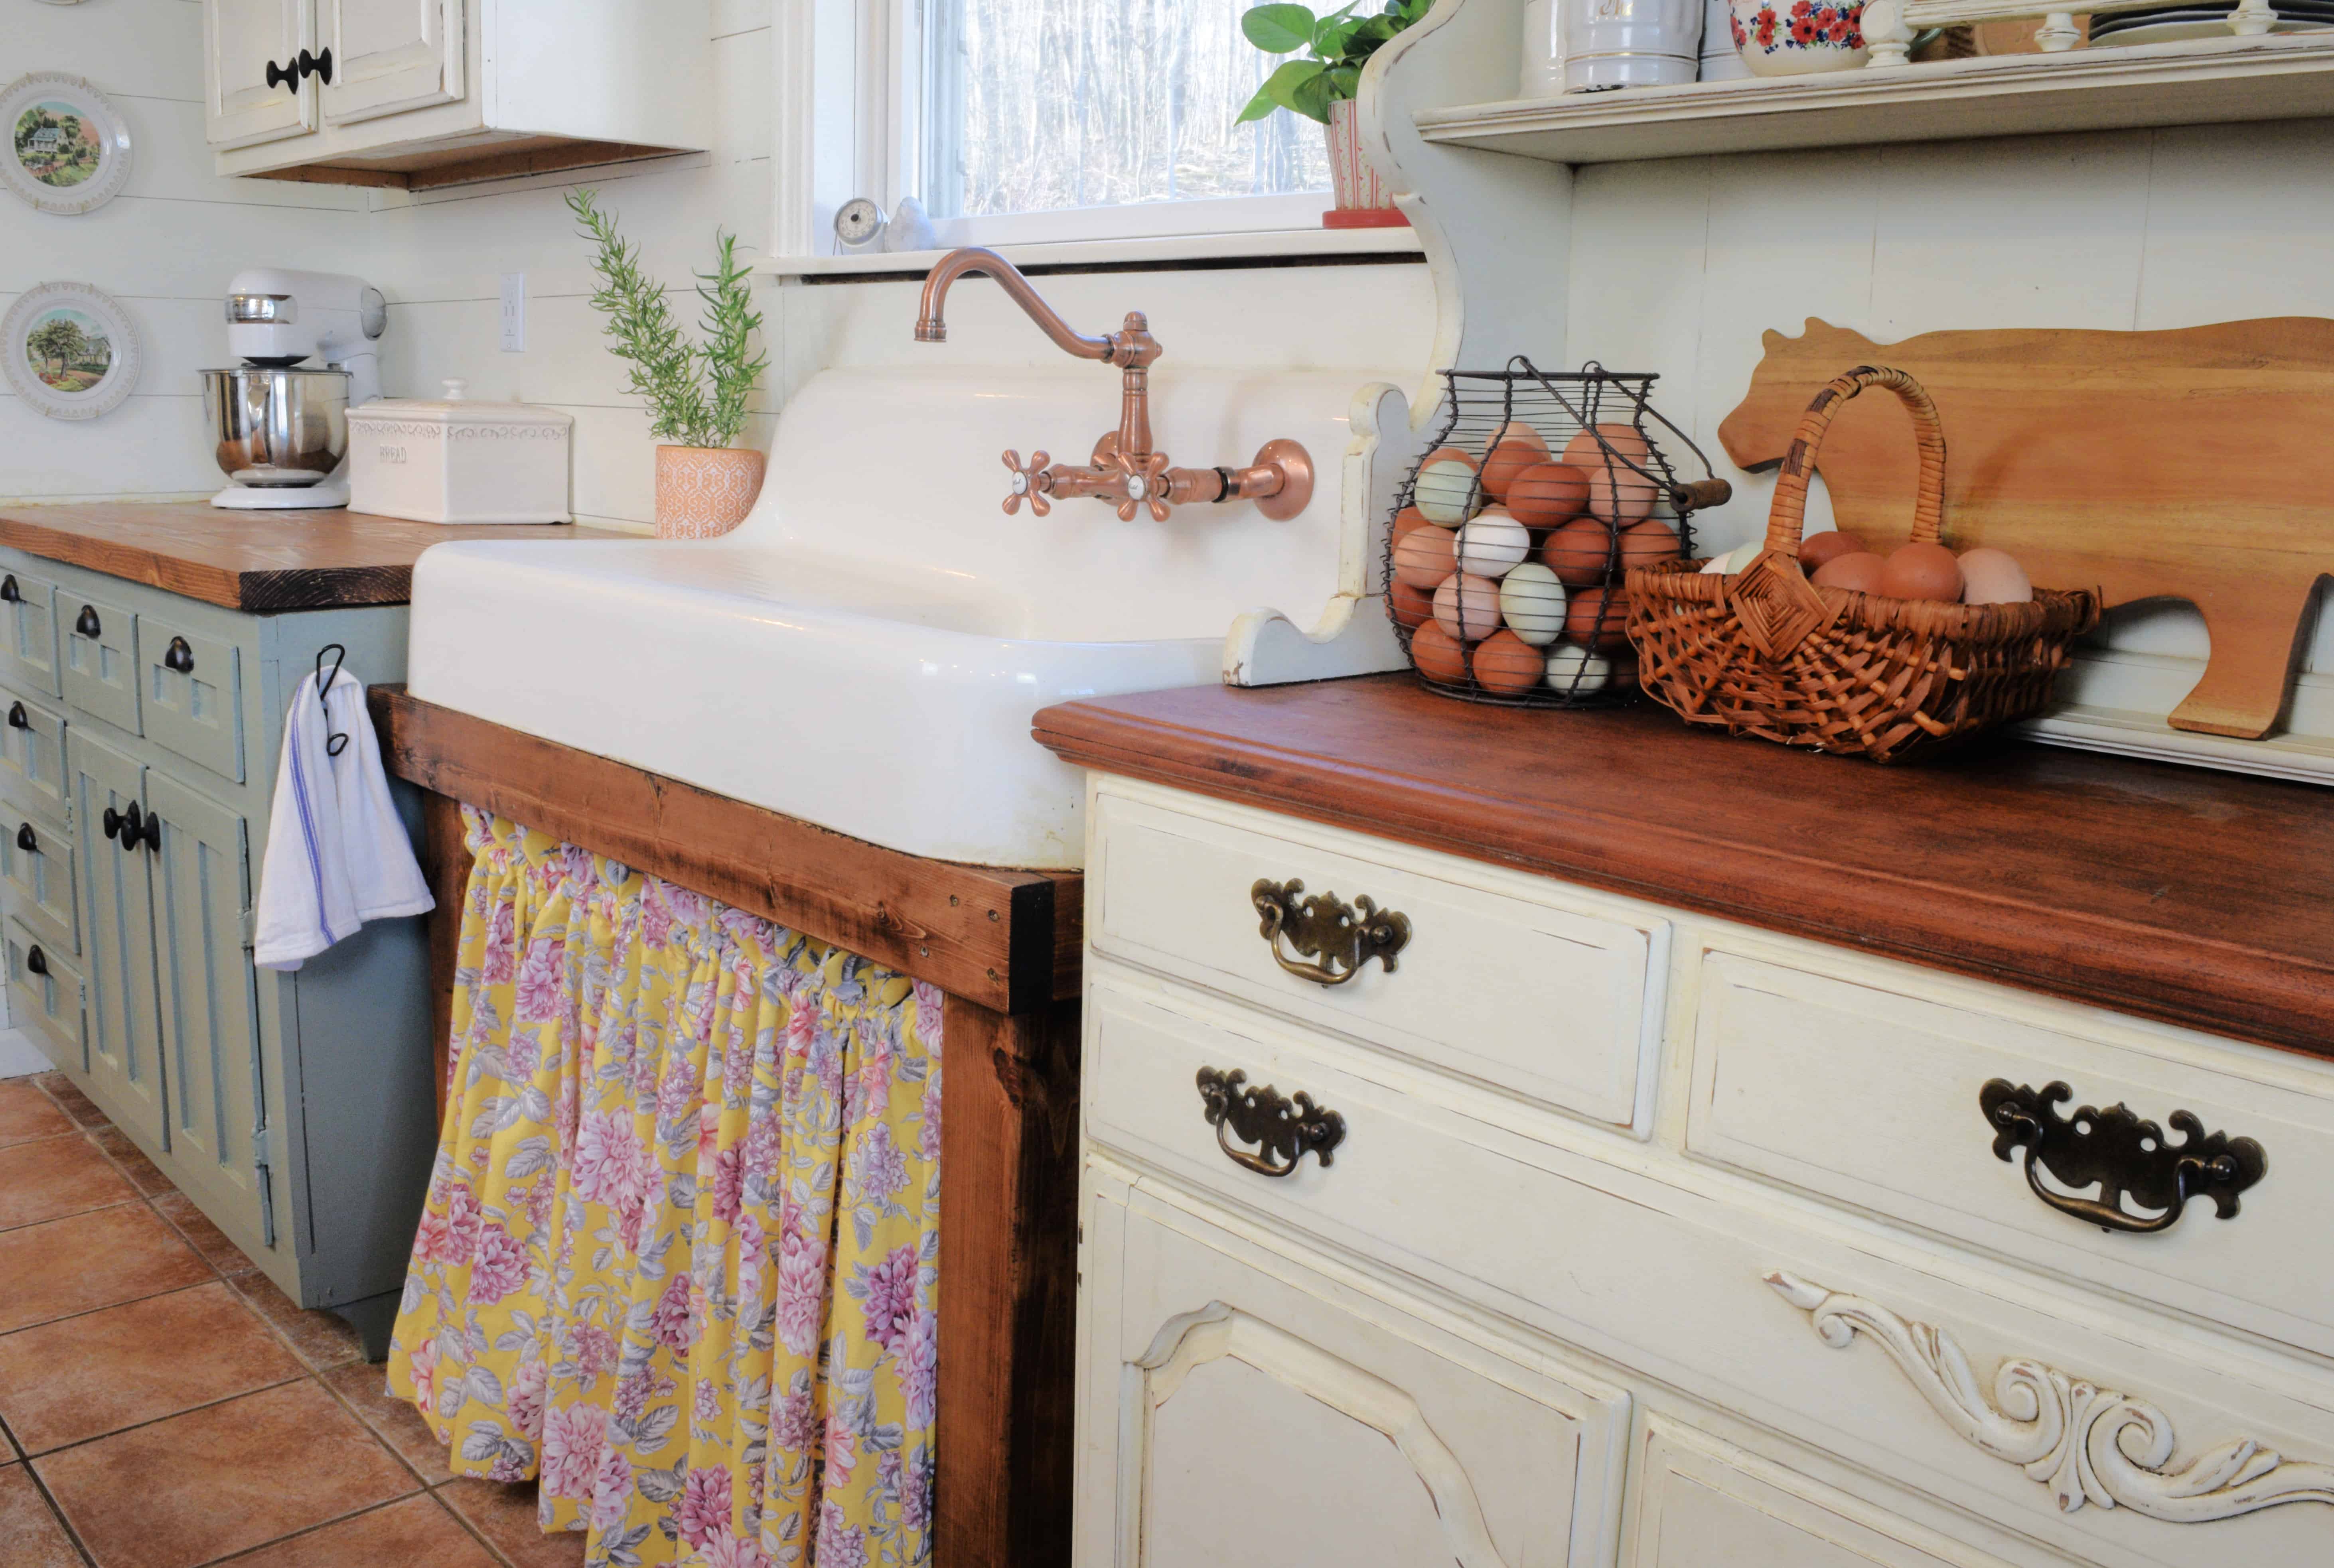 A white backer hutch with a brown contertop next to a white sink and a Brown sink frame with a yellow and pink floral cotton material sink skirt attached. Next to a green cabinet with a brown countertop on top of brown tile. A white shiplap backsplash with a window above the sink.